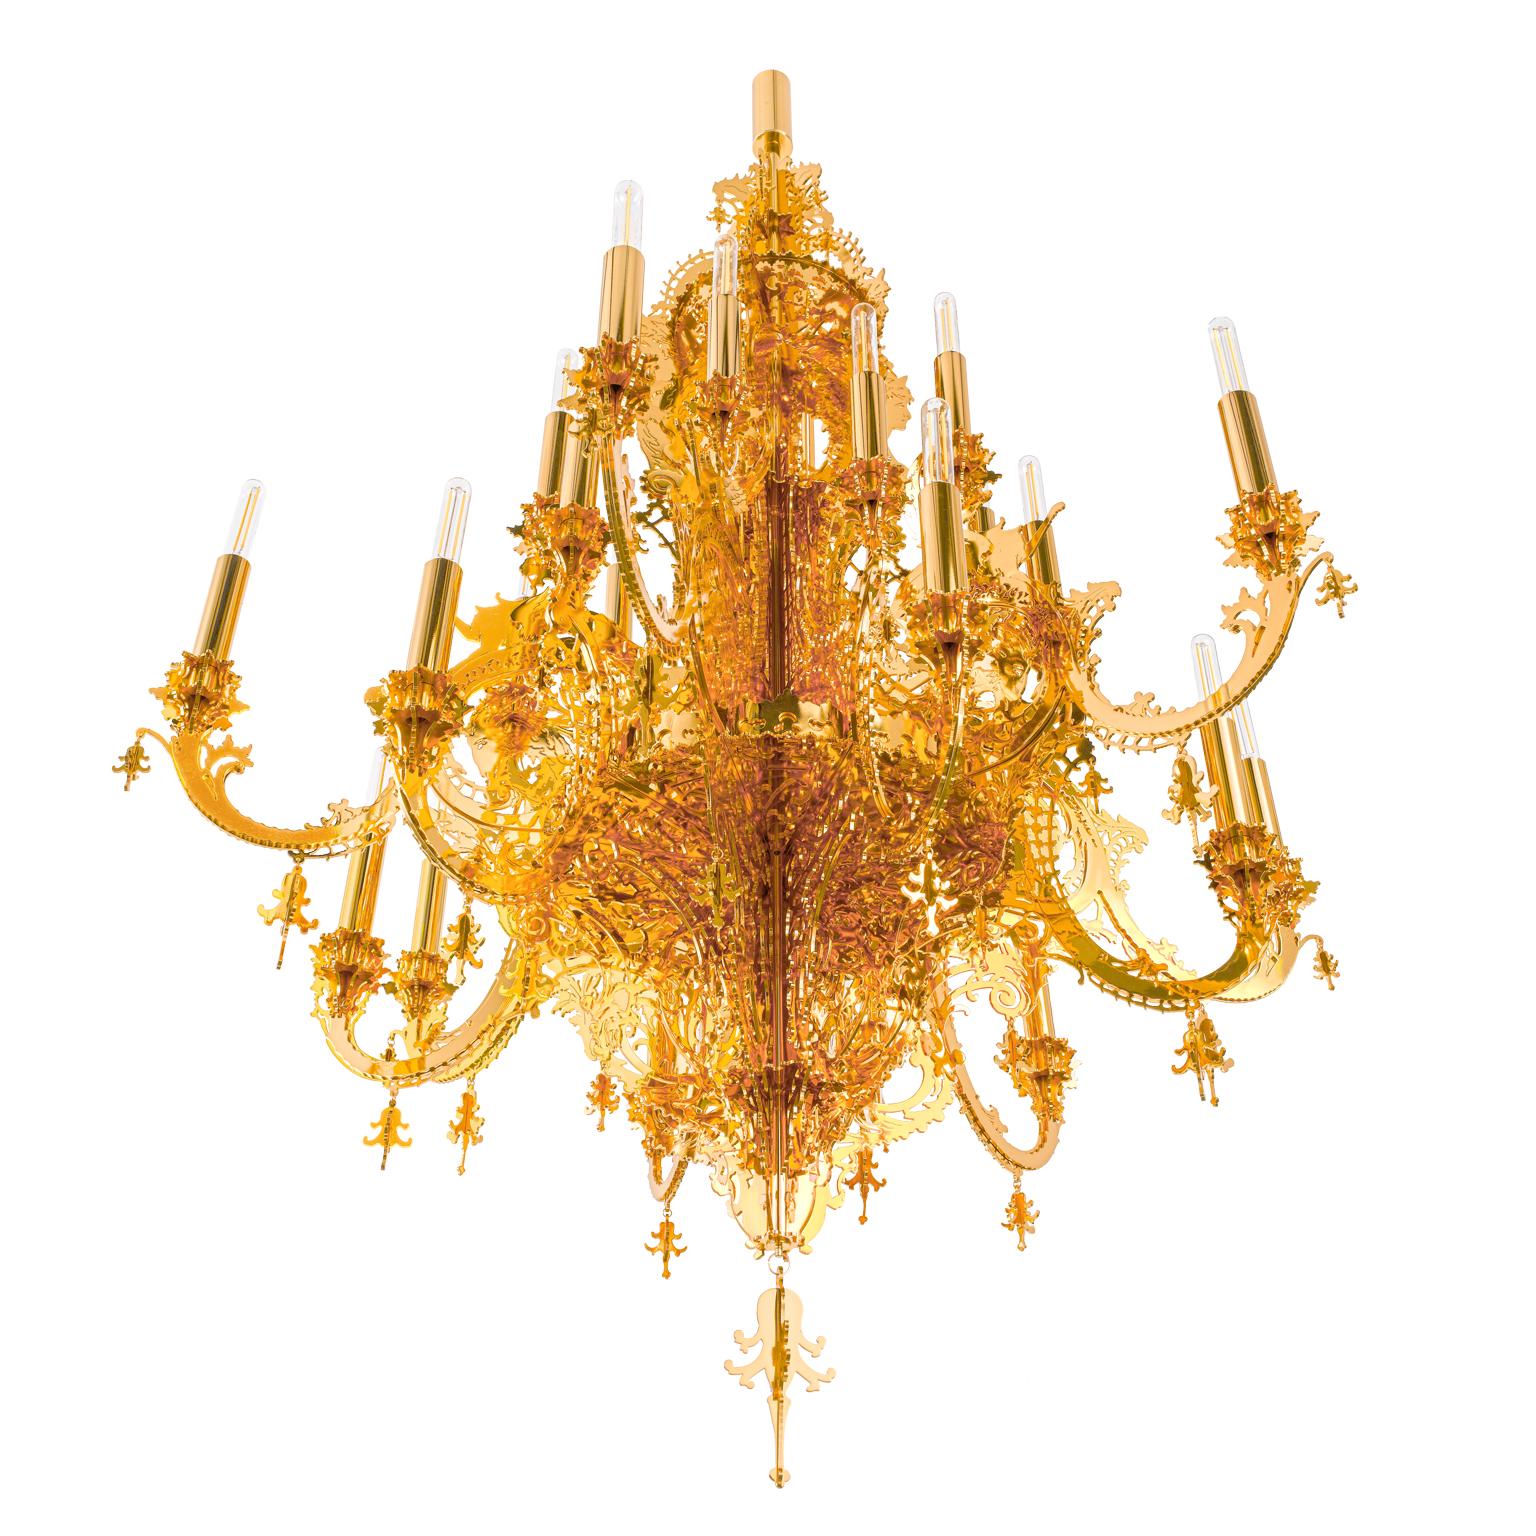 This contemporary chandelier is made in metallic lace and plated gold 24-karat, it is a very decorative hanging light with 12 branches for 24-light bulbs. The chandelier was designed by Enzo Scibetta, using pencil, fretsaw, gimlet, clamps, glue,